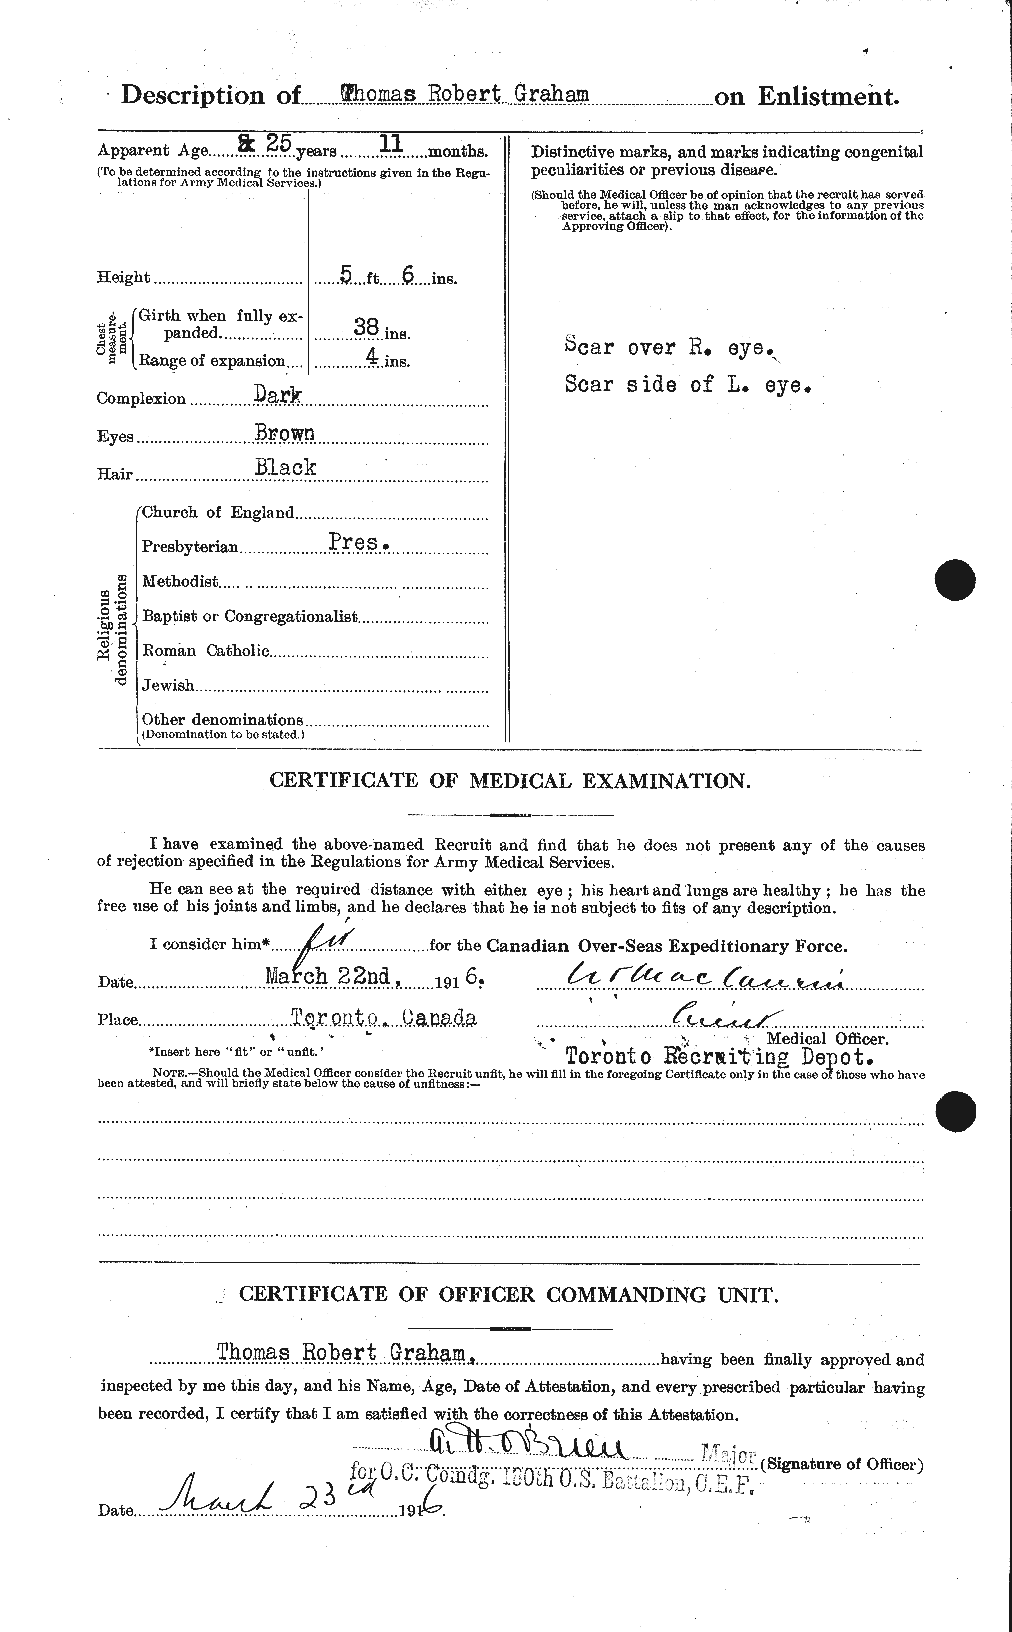 Personnel Records of the First World War - CEF 359528b